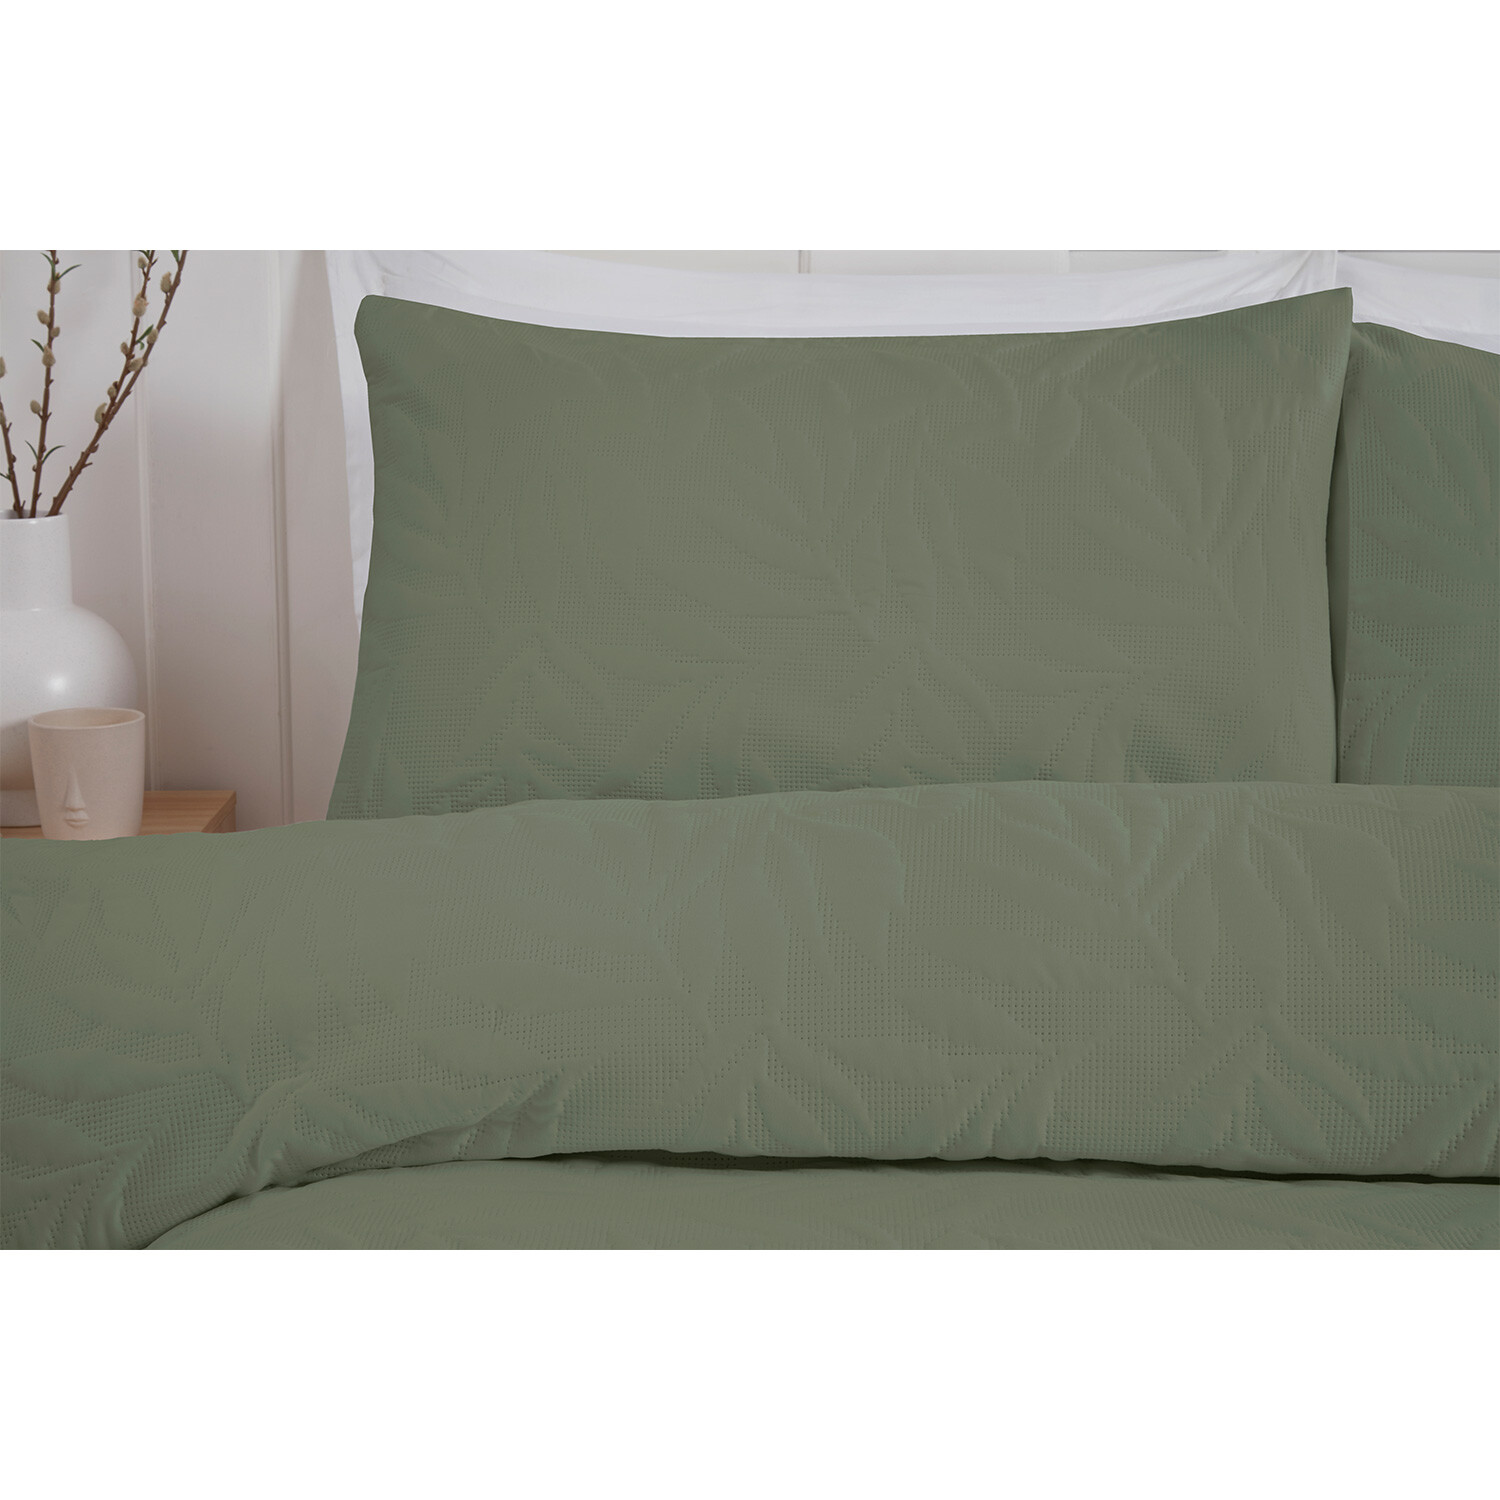 Avery Leaf Duvet Cover and Pillowcase Set - Olive Green / Double Image 2